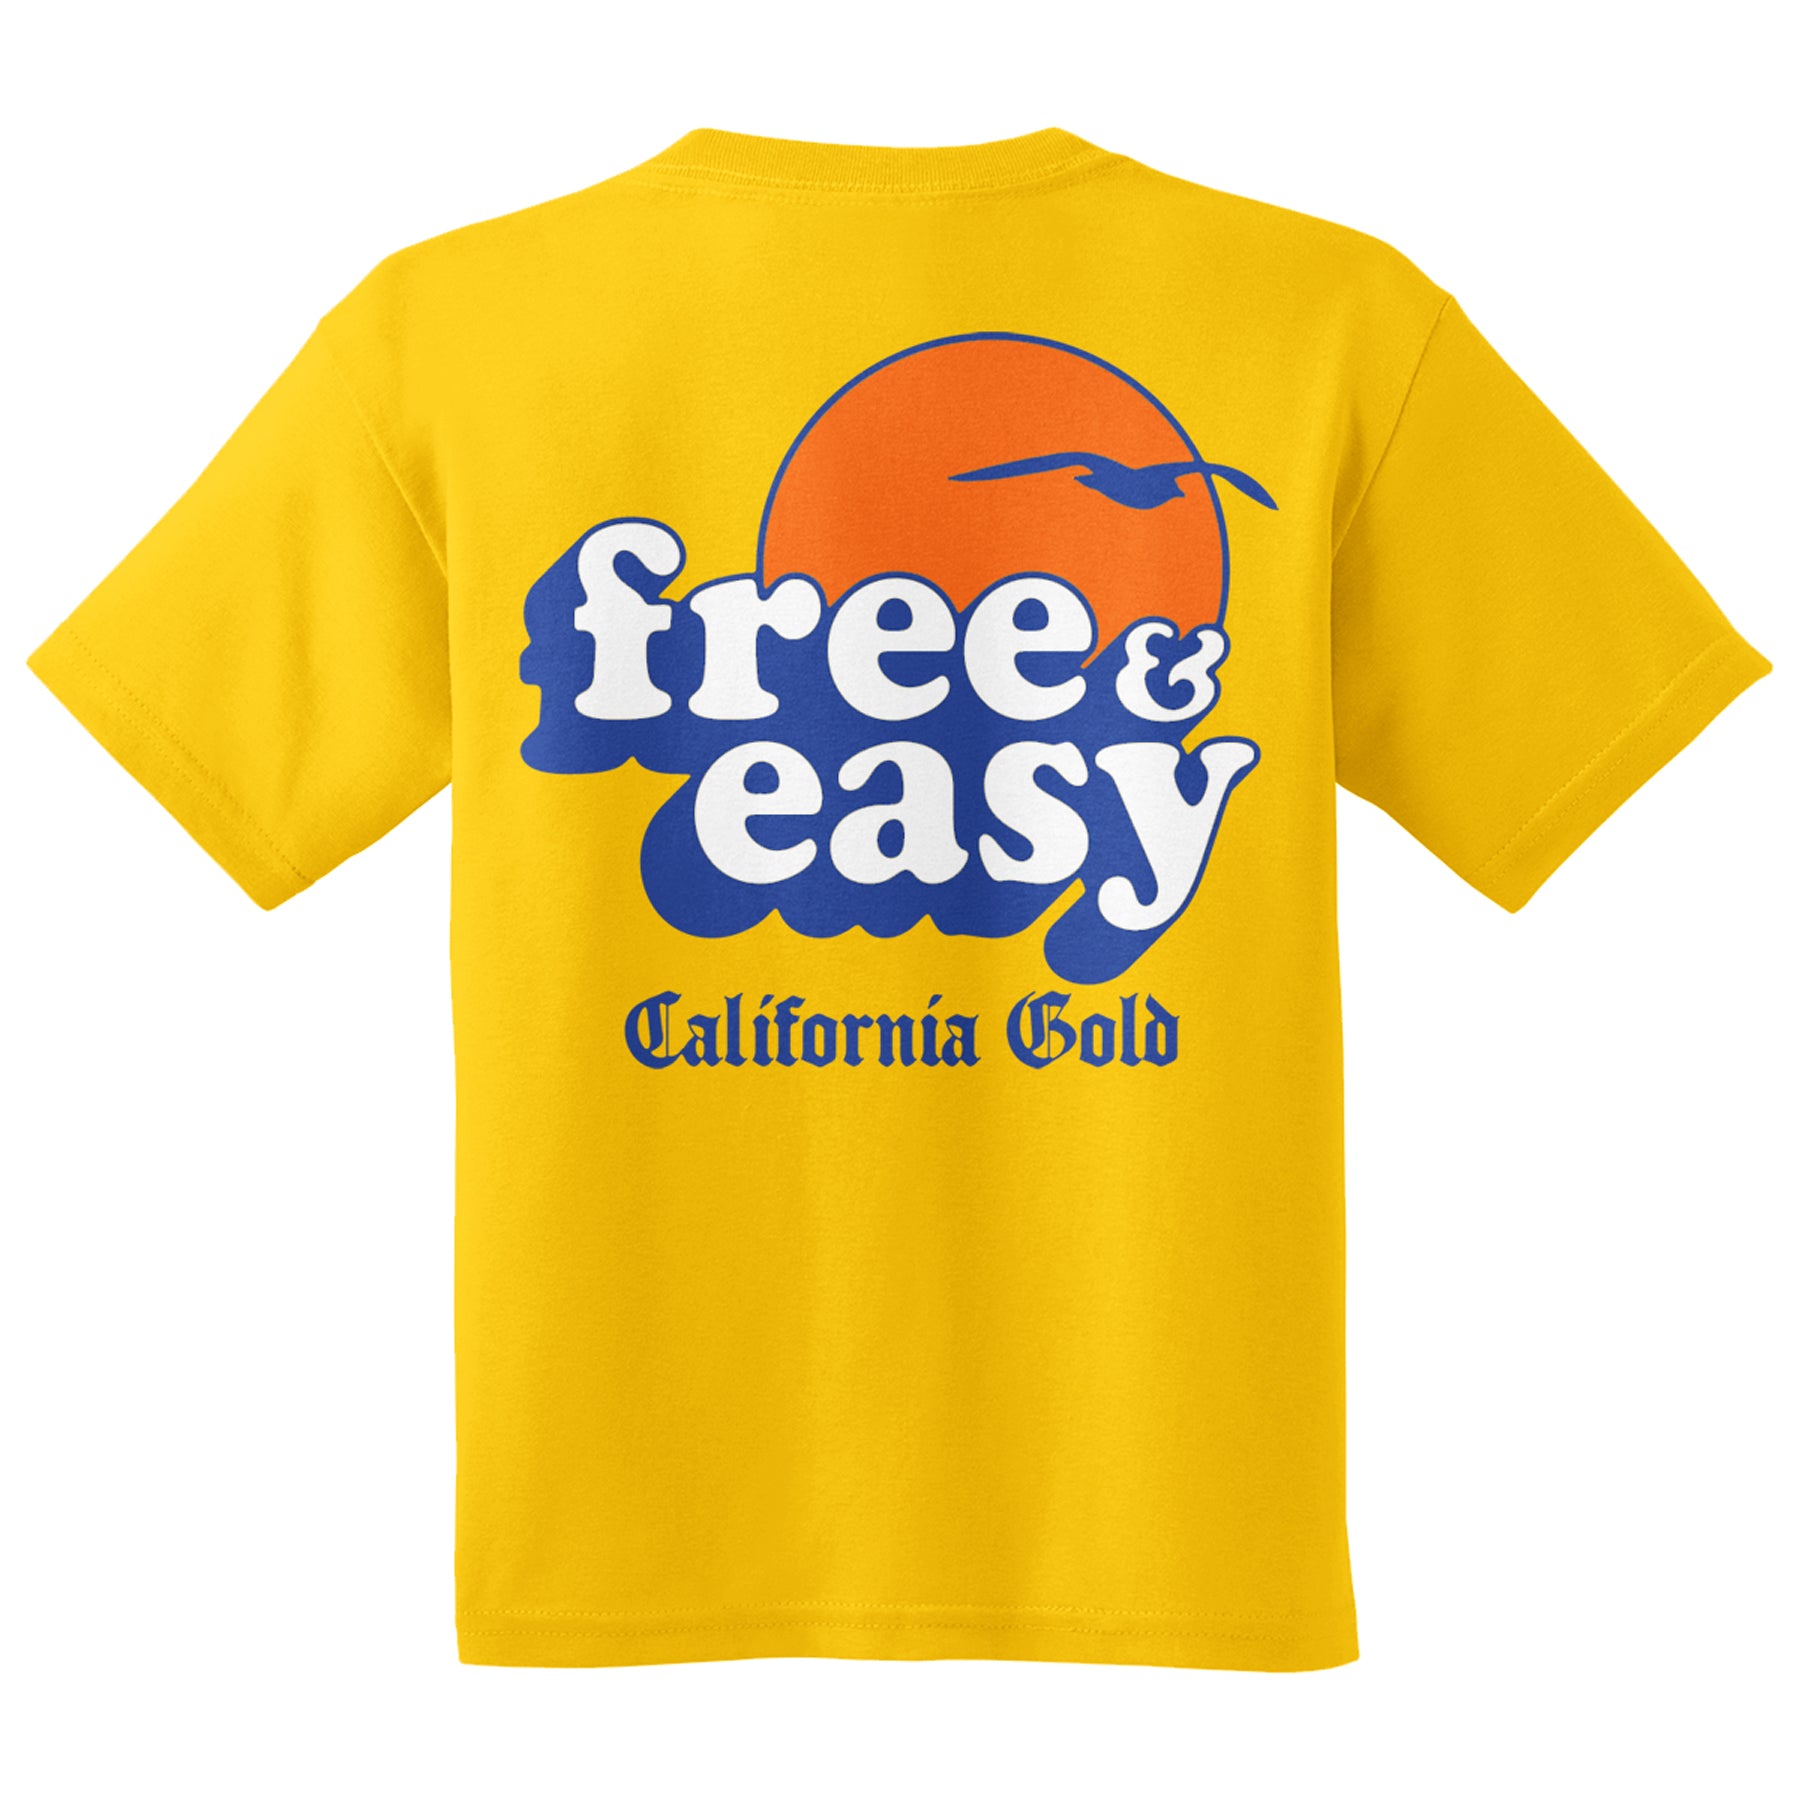 Baja Sun Kids Tee in yellow with white navy and orange Free & Easy California Gold sun bird design on a white background, back - Free & Easy